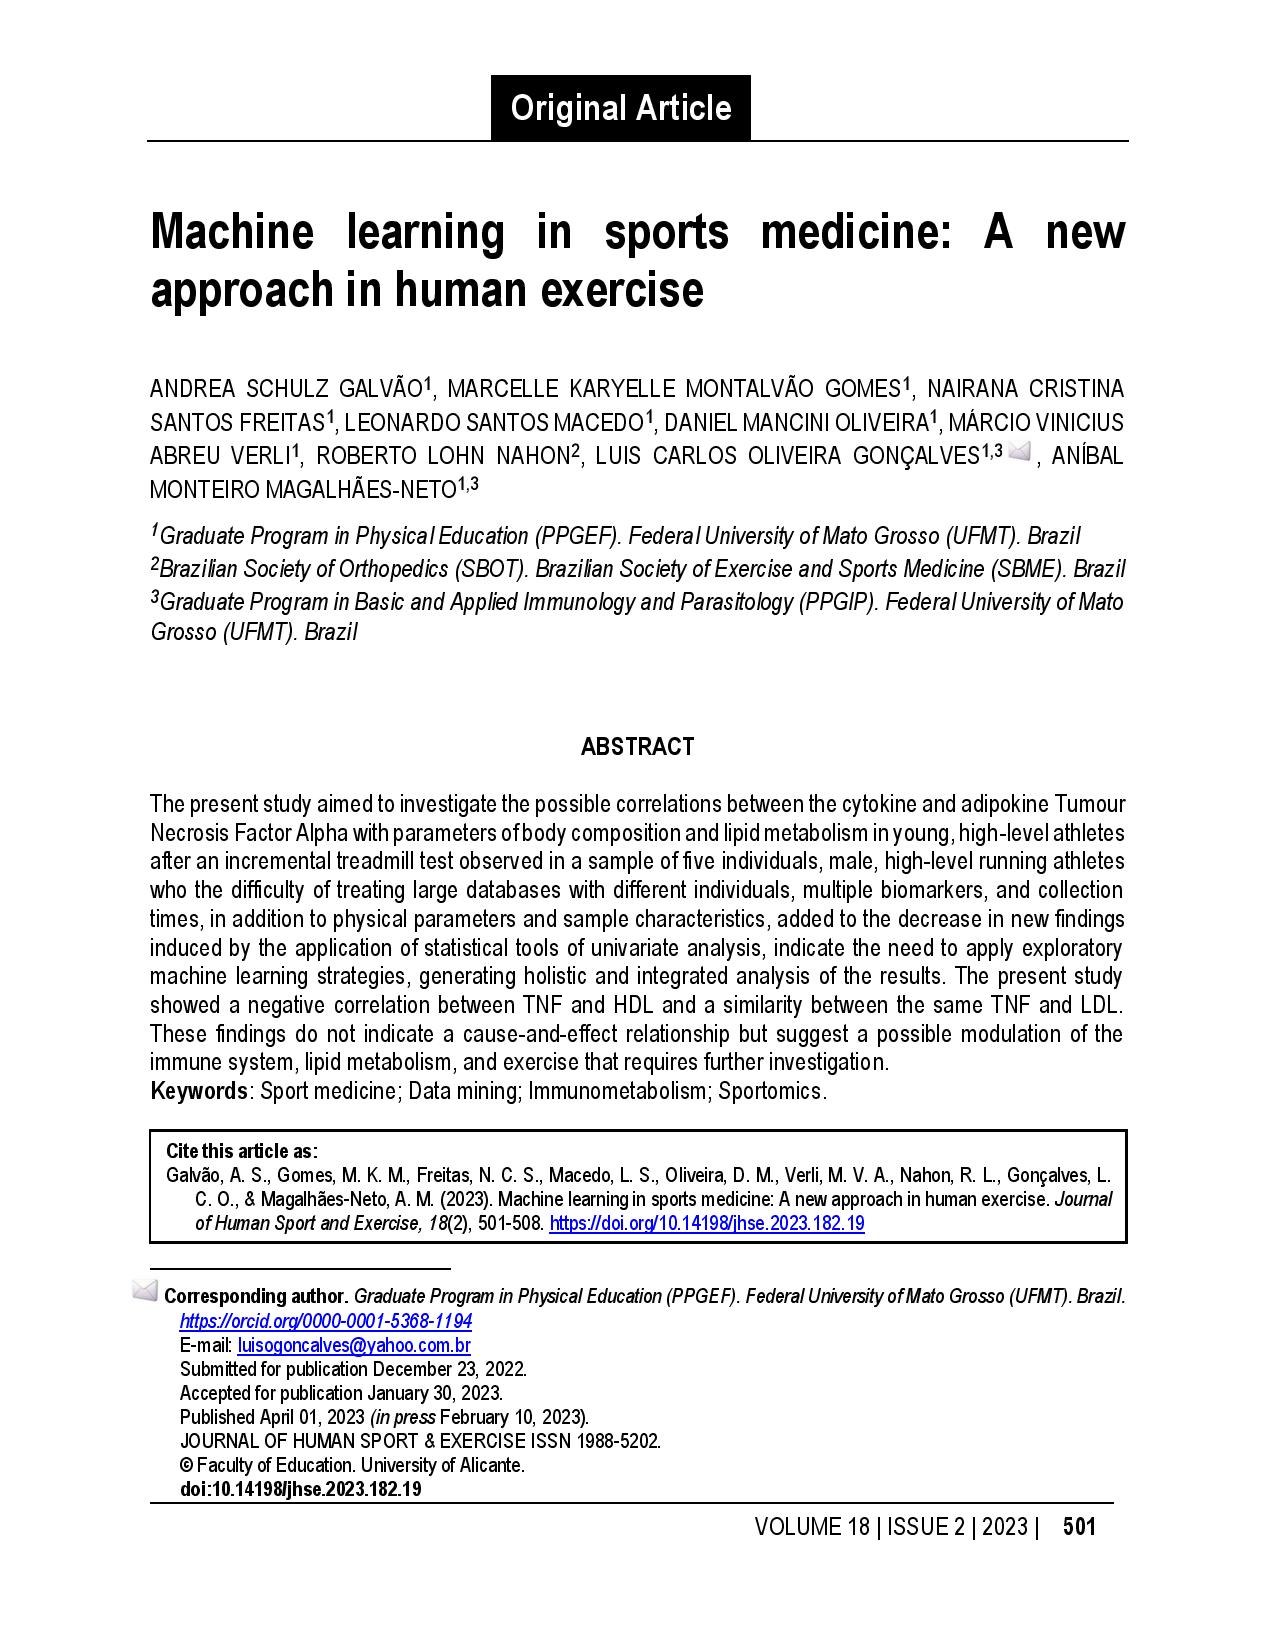 Machine learning in sports medicine: A new approach in human exercise